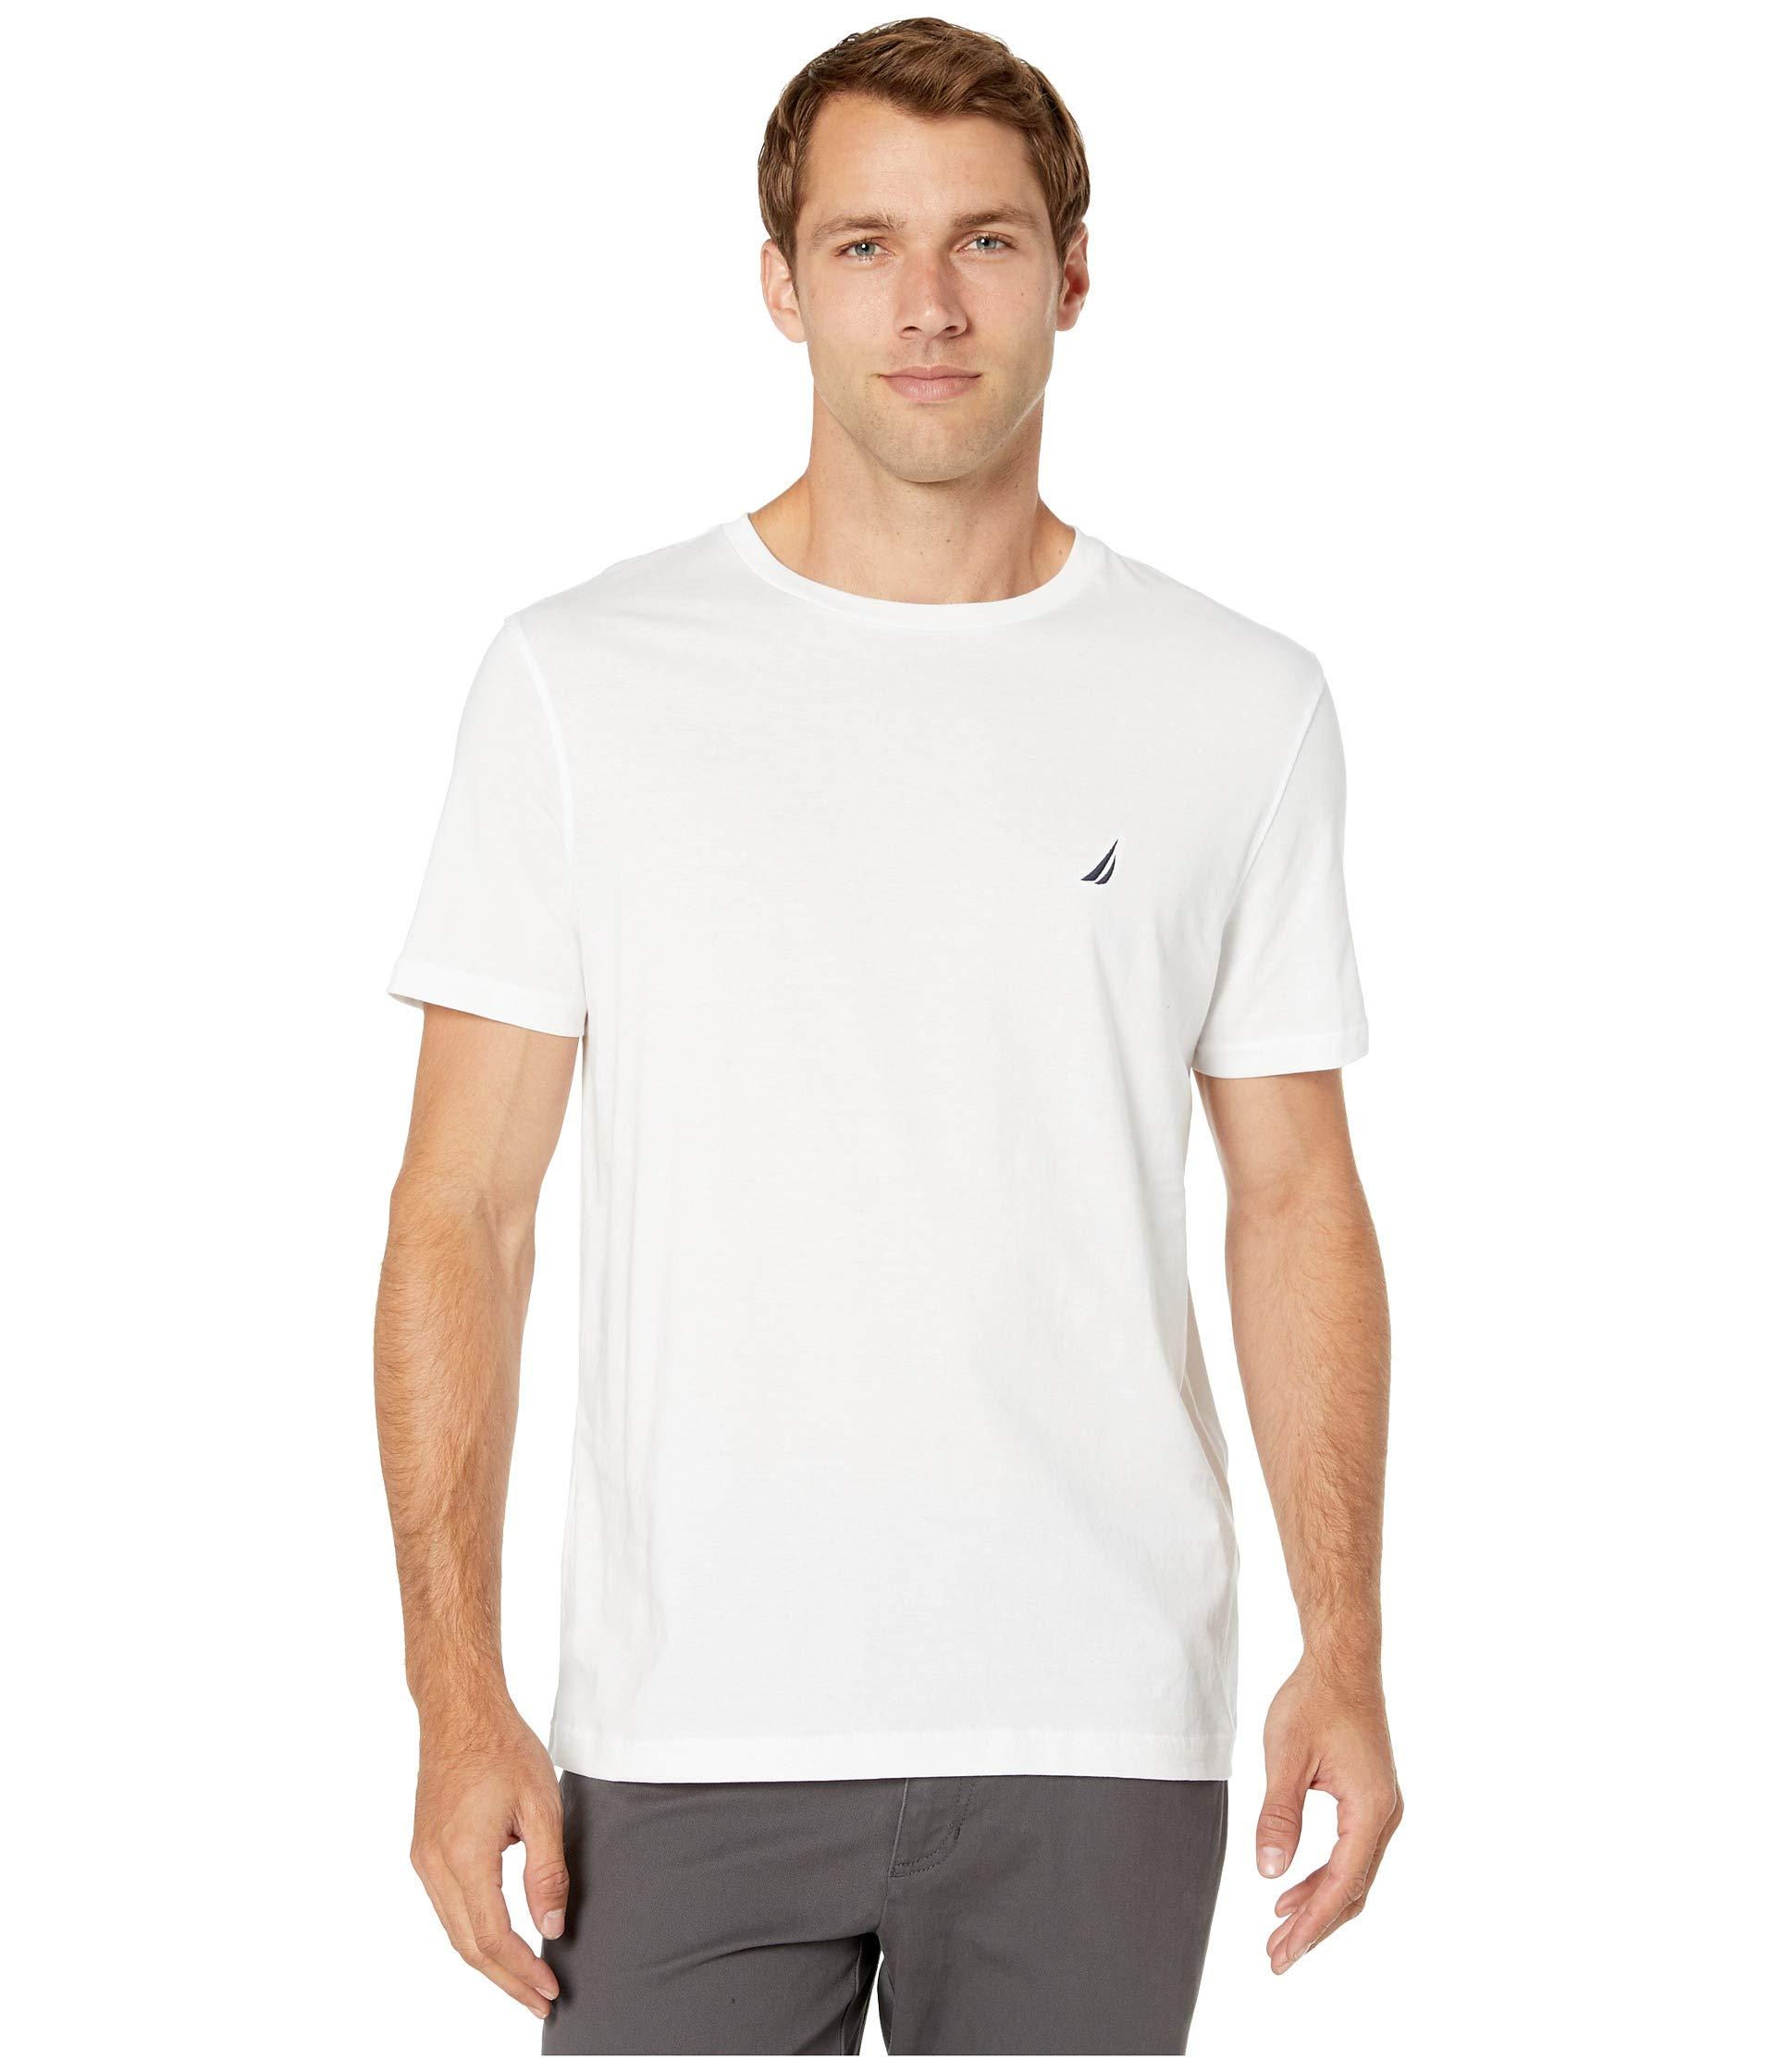 Nautica Cotton Short Sleeve Solid Crew Neck T-shirt in White for Men - Lyst